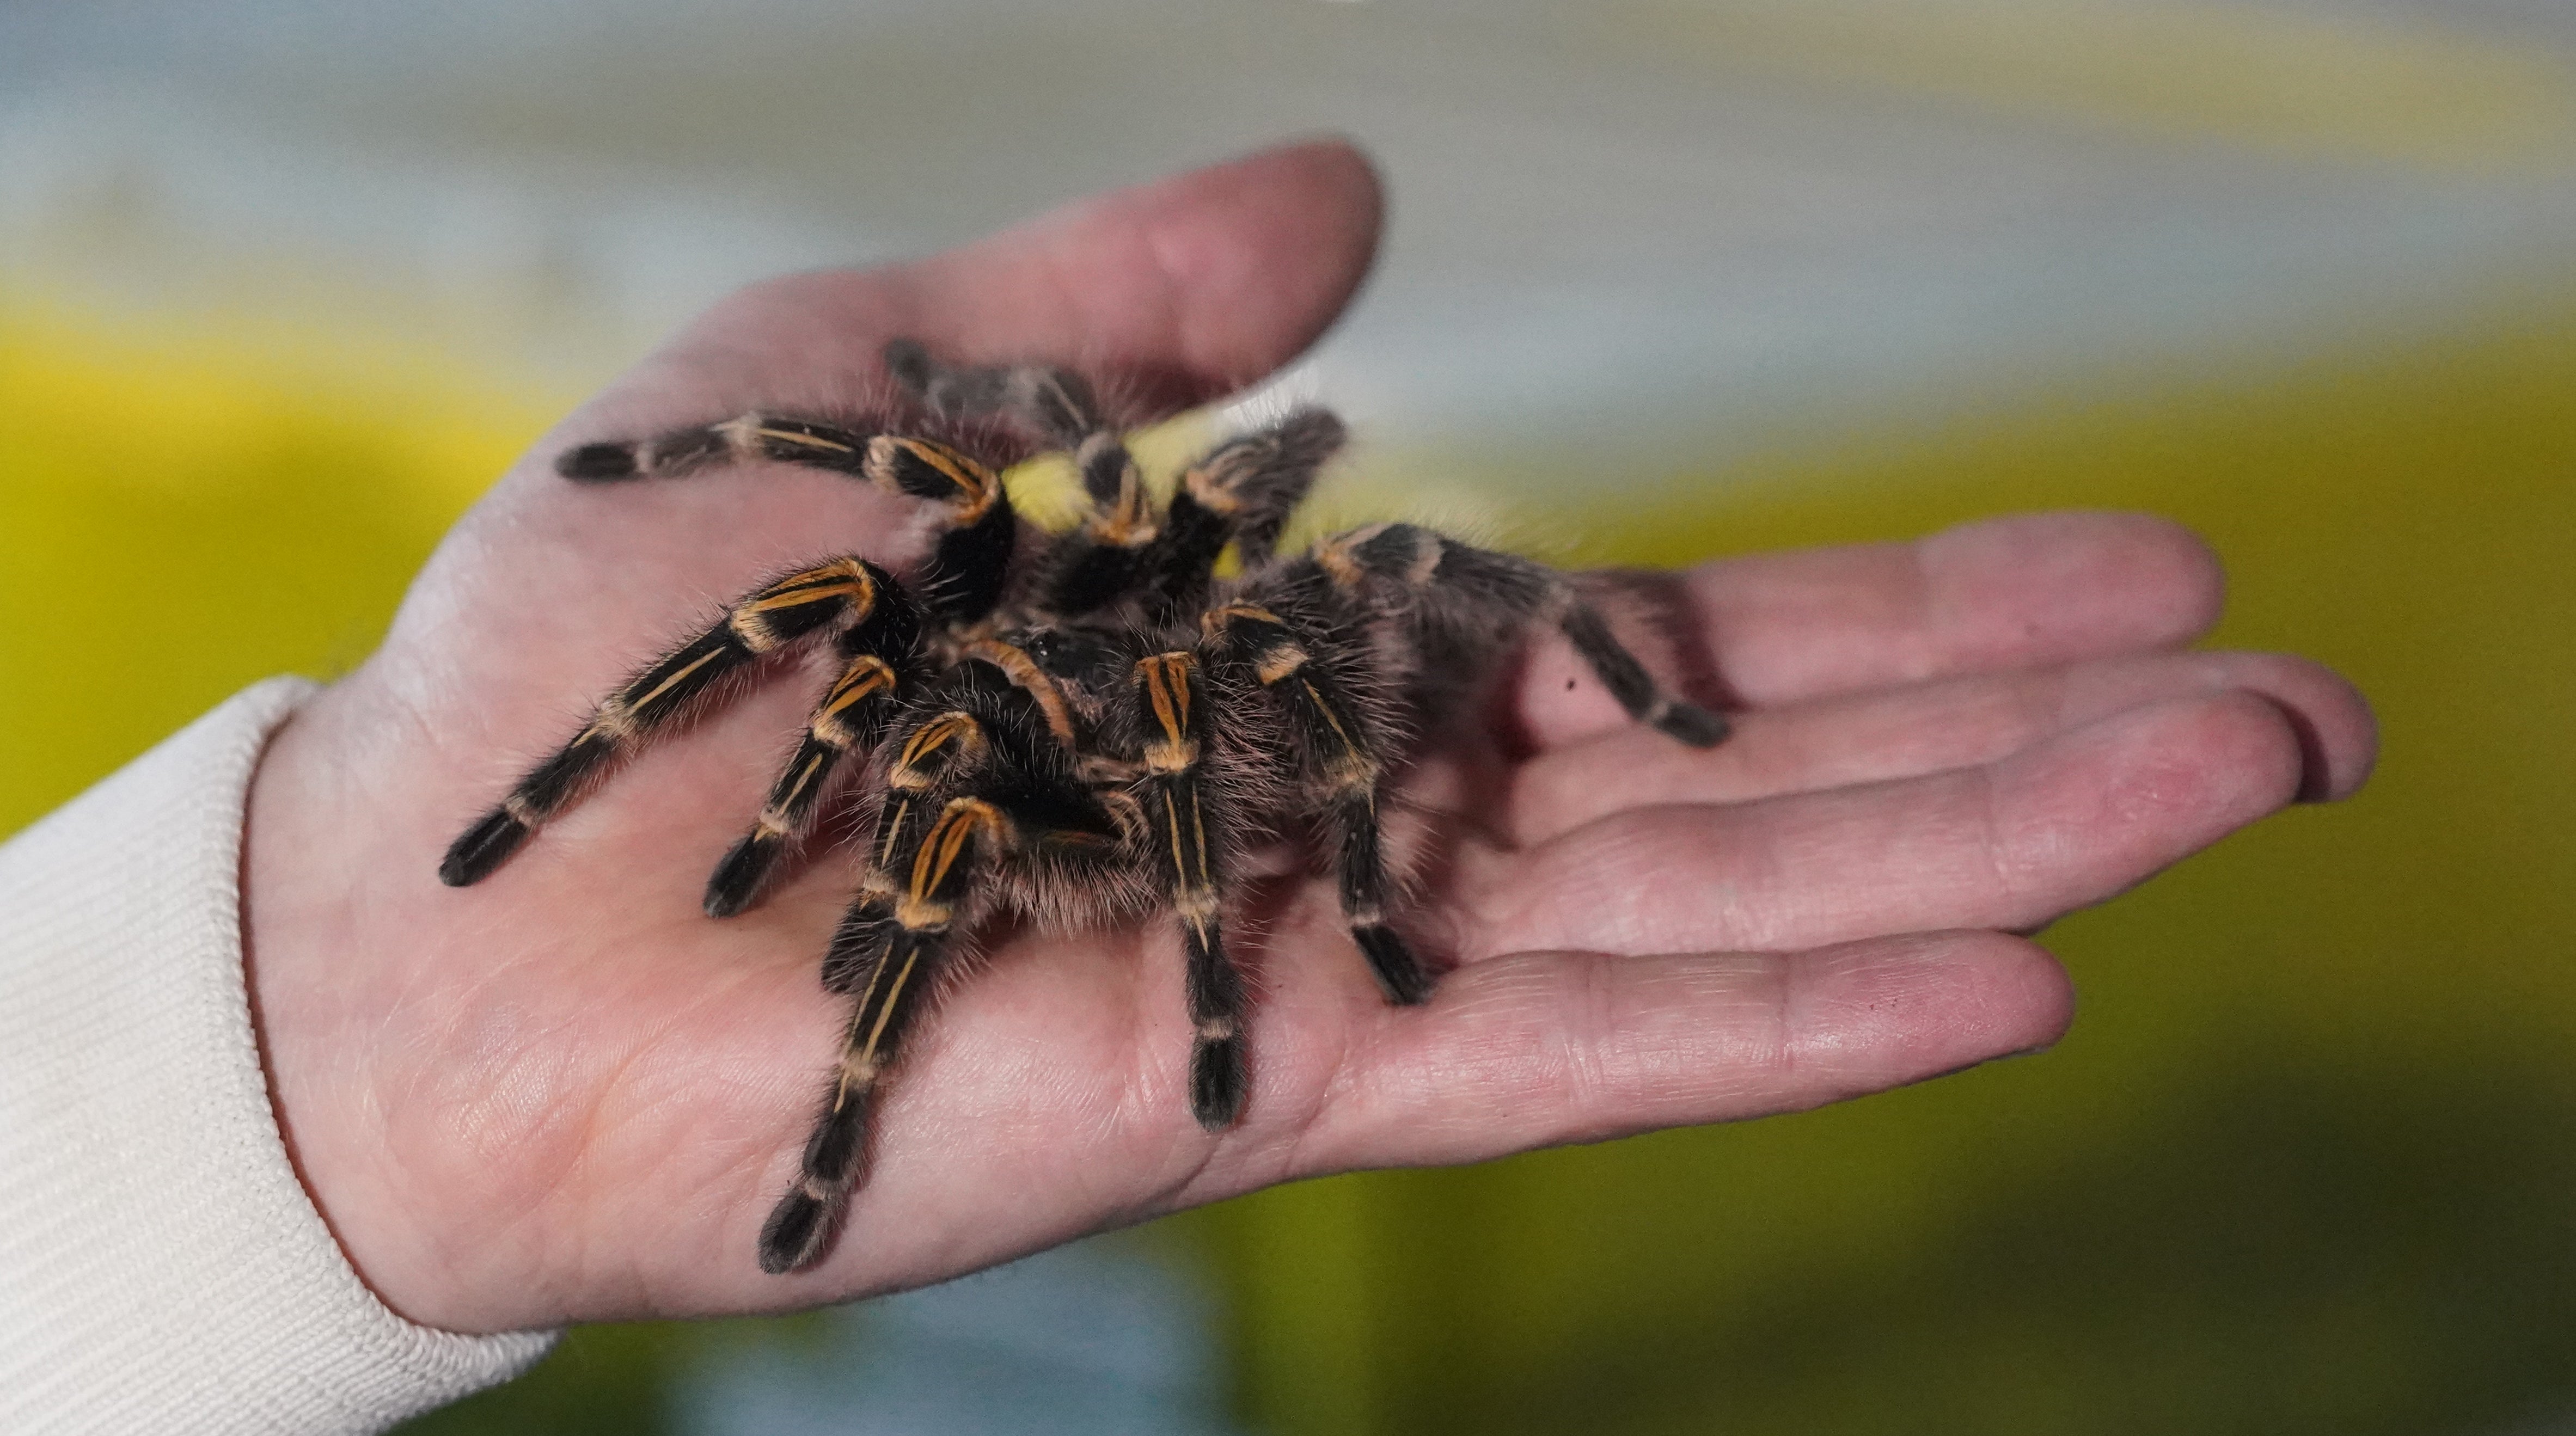 Many species of live tarantulas which are not endangered but whose trade is tightly controlled were also listed for sale